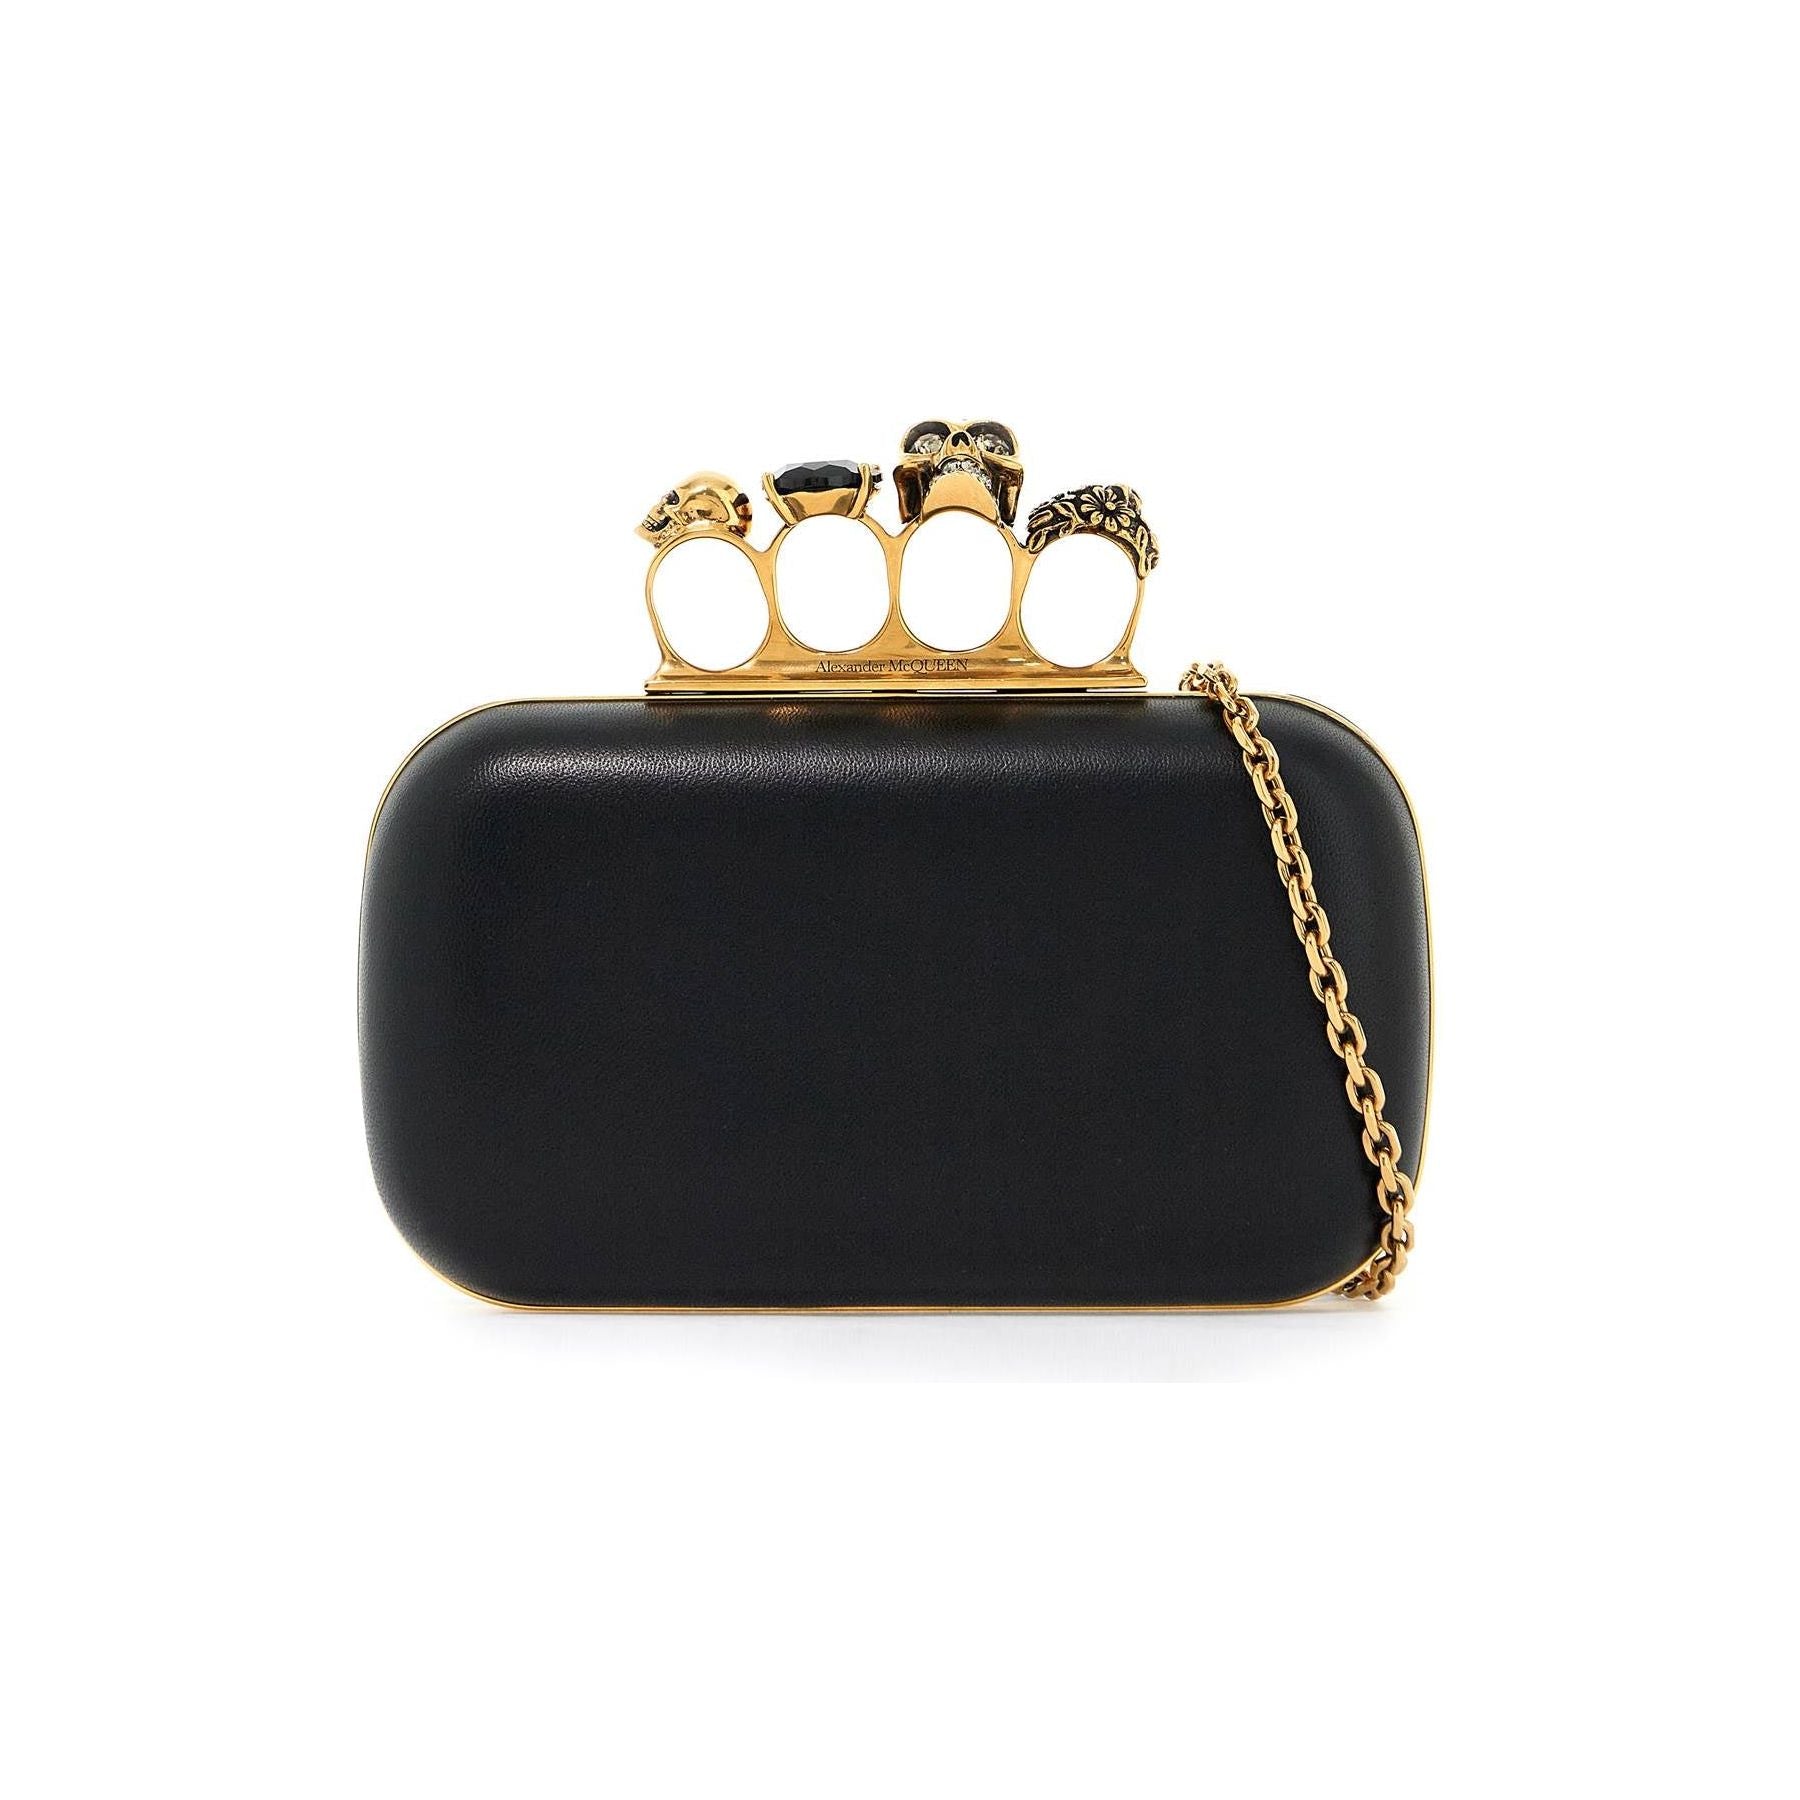 Leather Knuckle Chain Clutch